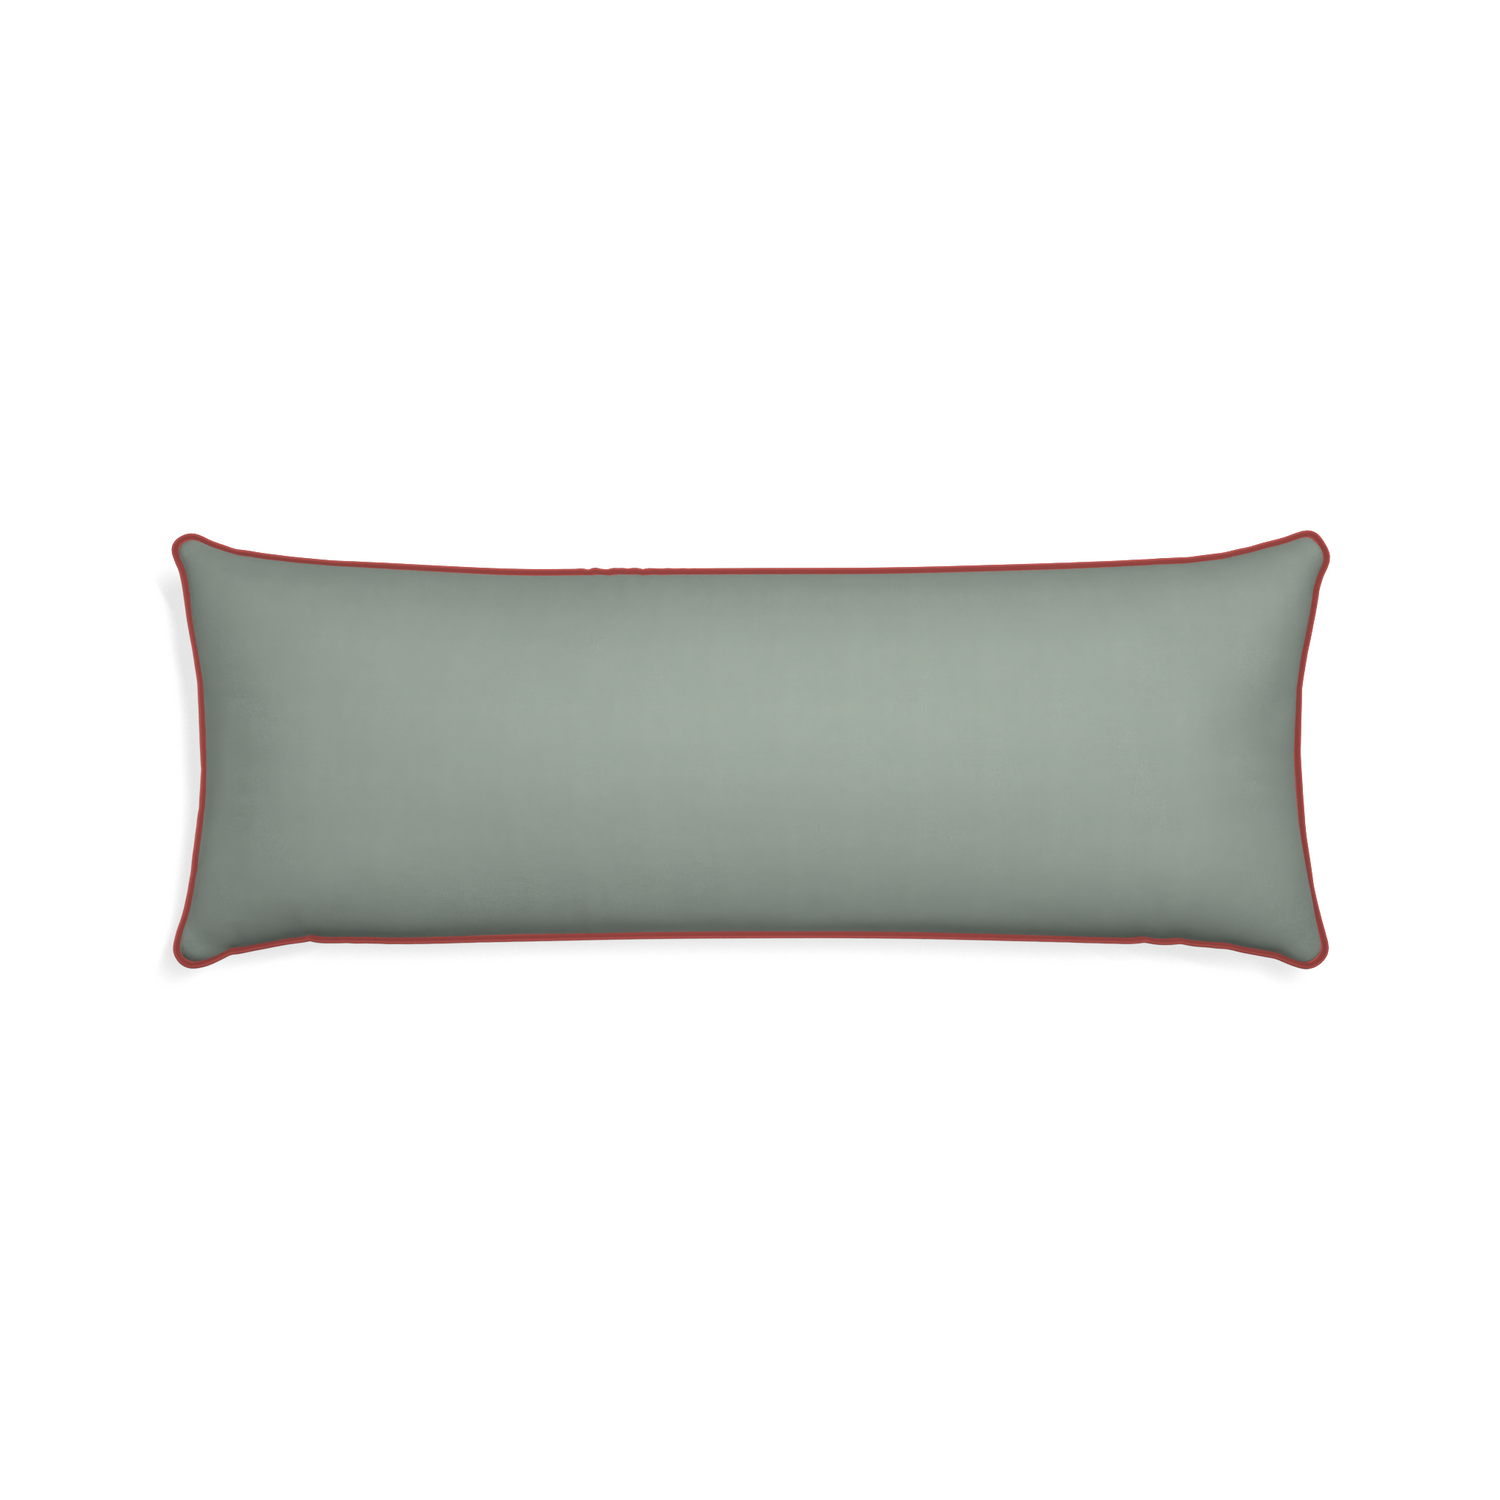 Petite-lumbar sage custom sage green cottonpillow with c piping on white background